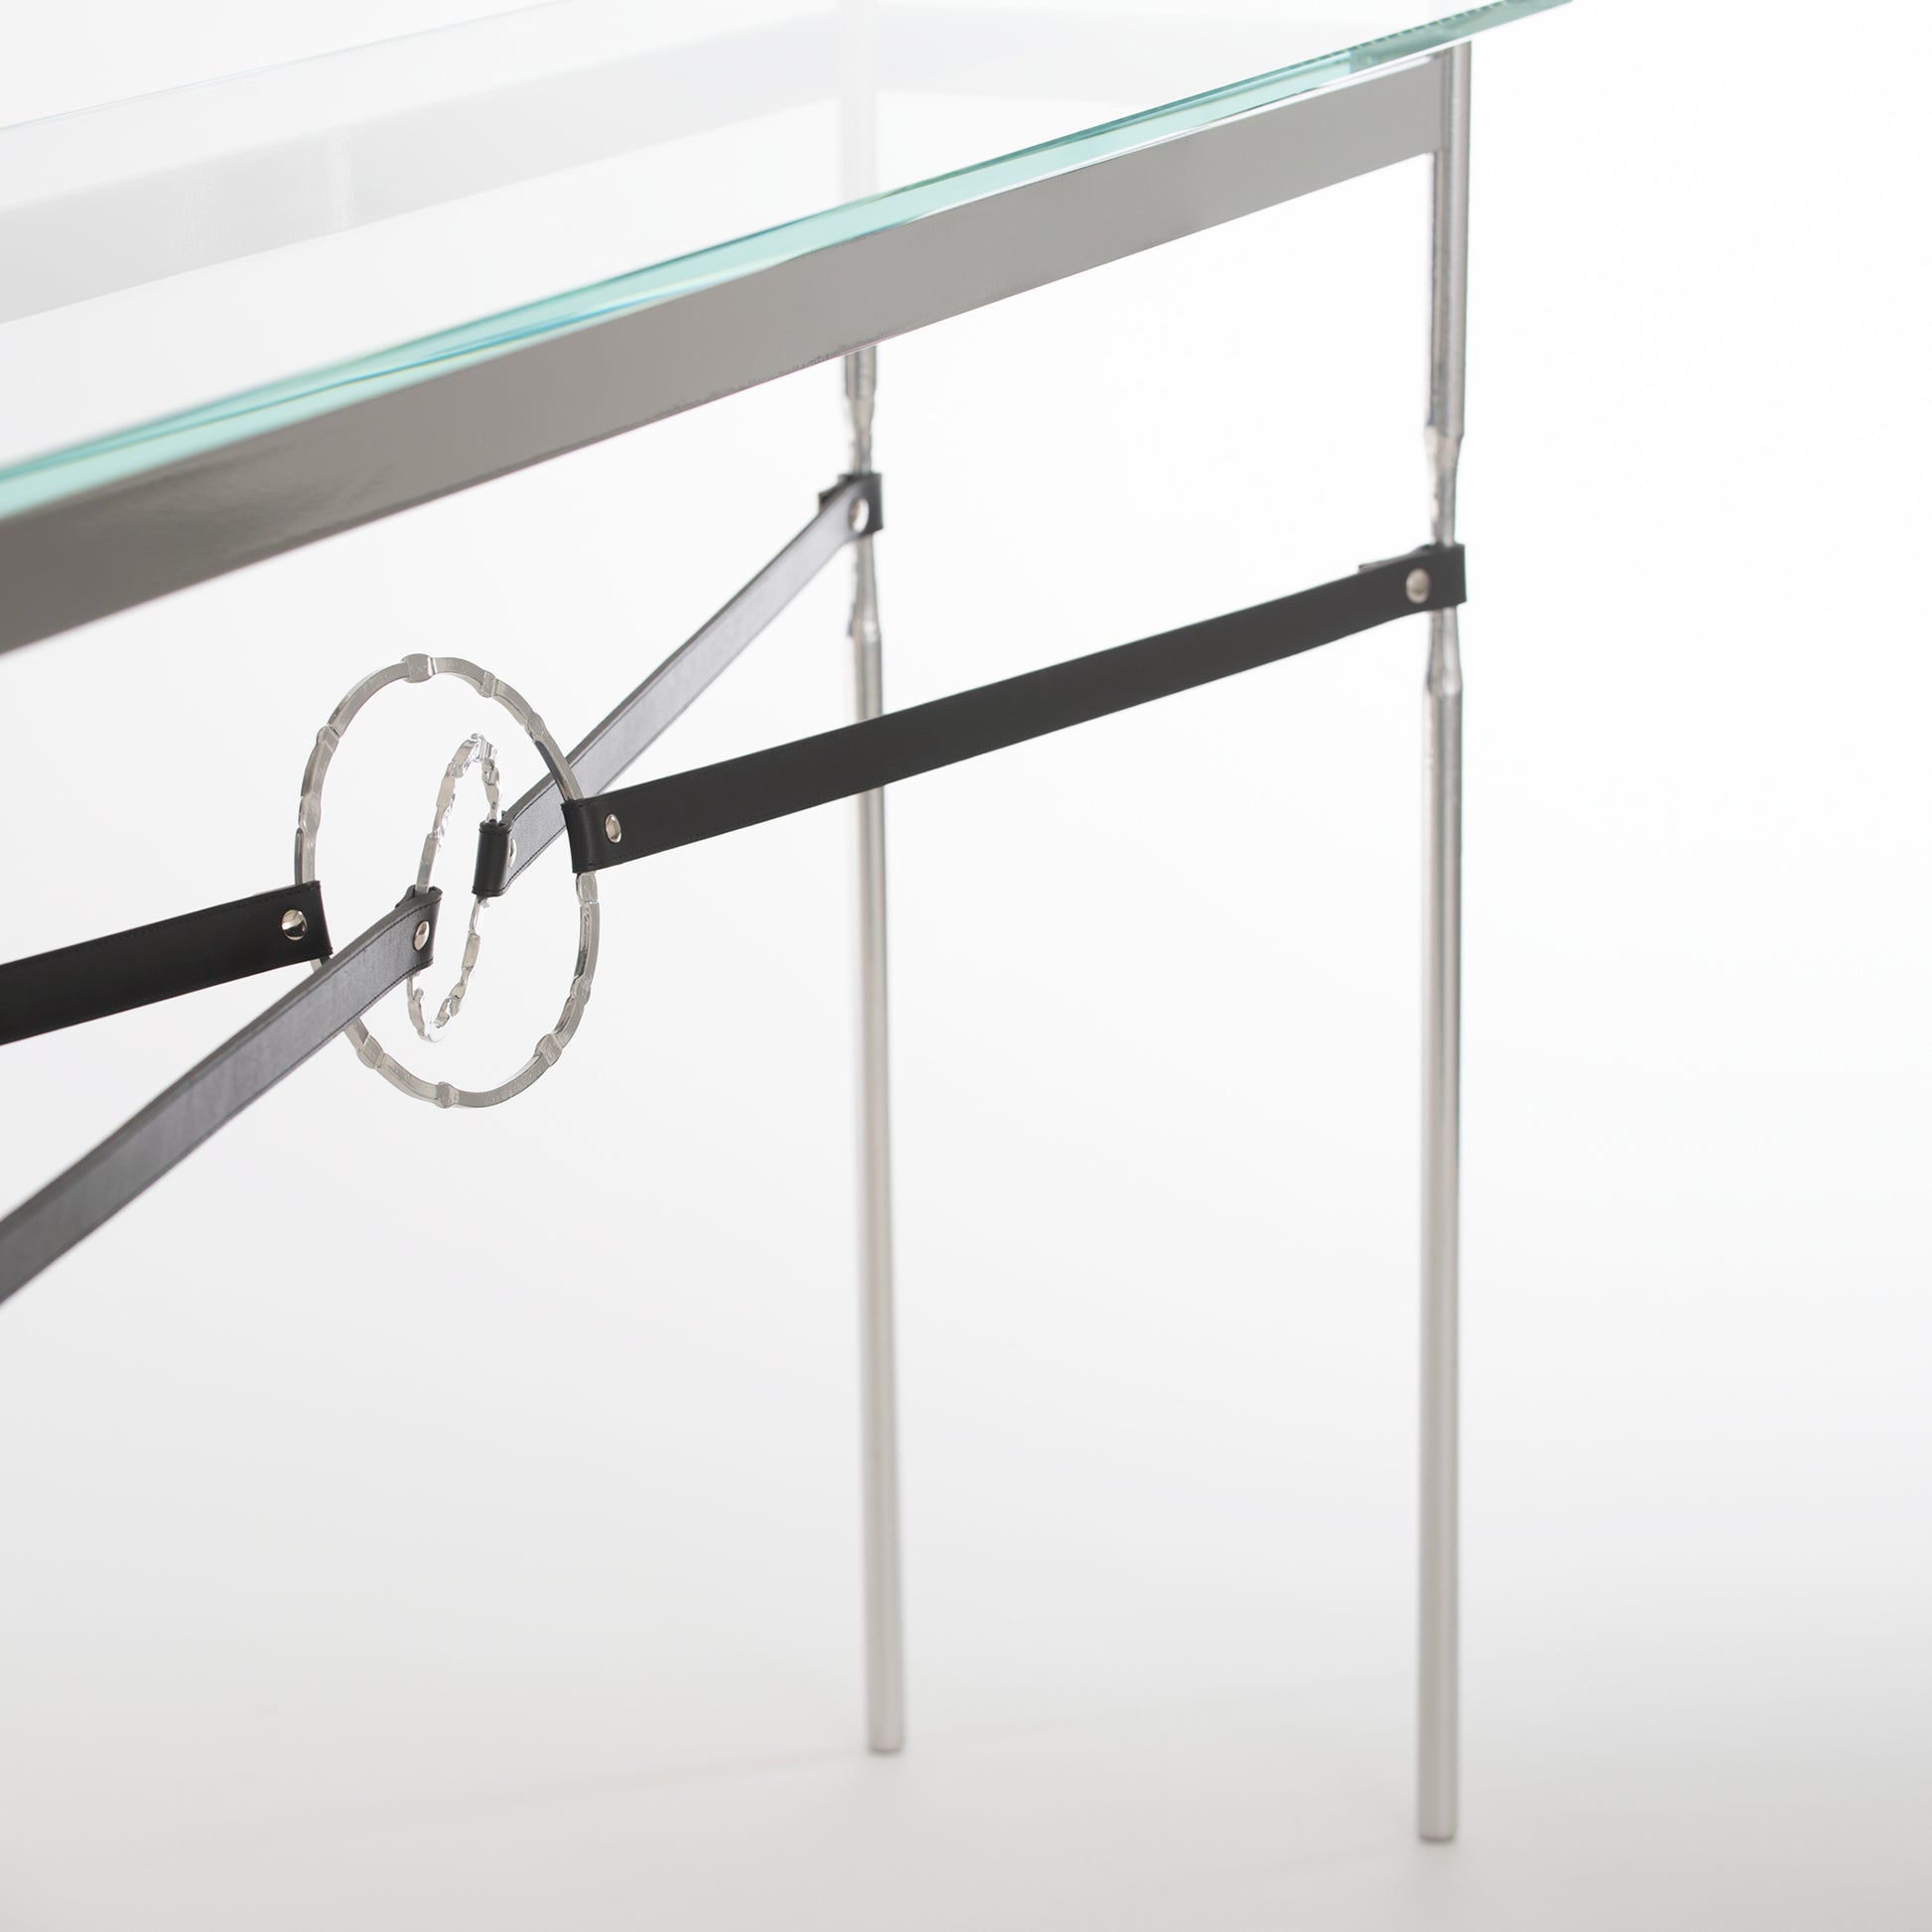 An Equus Console Table by Hubbardton Forge, artisanal-made with a metal frame.